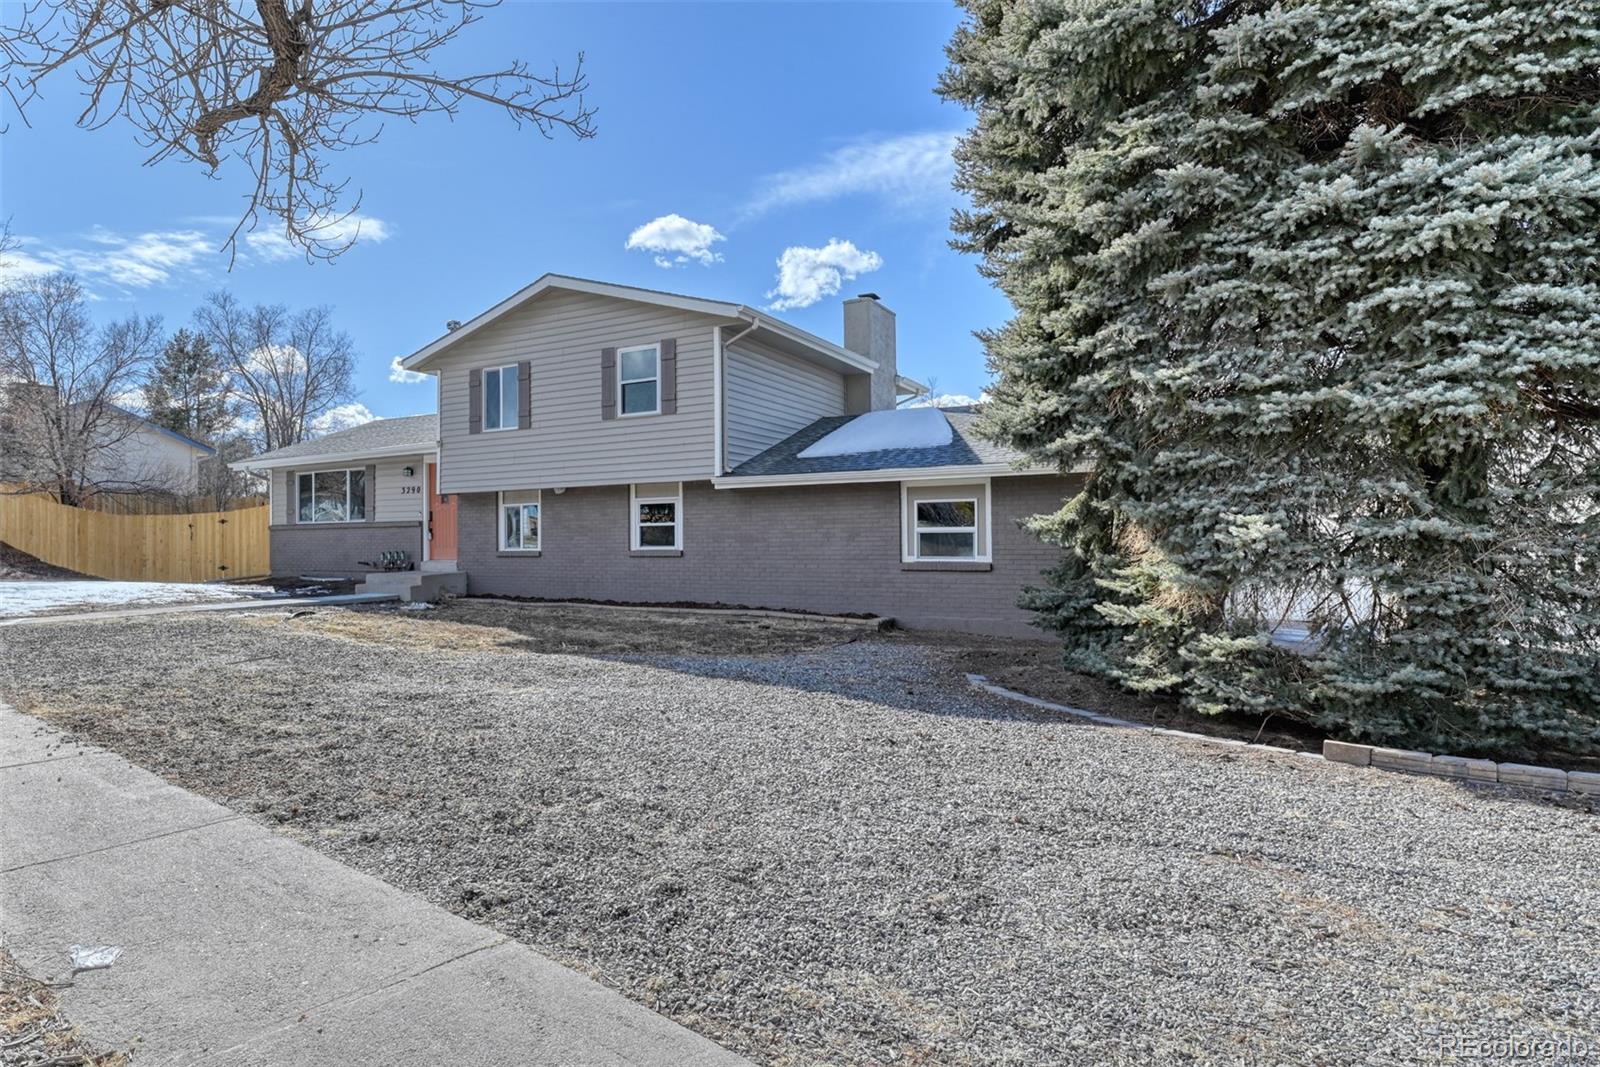 Report Image for 4675  Whimsical Drive,Colorado Springs, Colorado